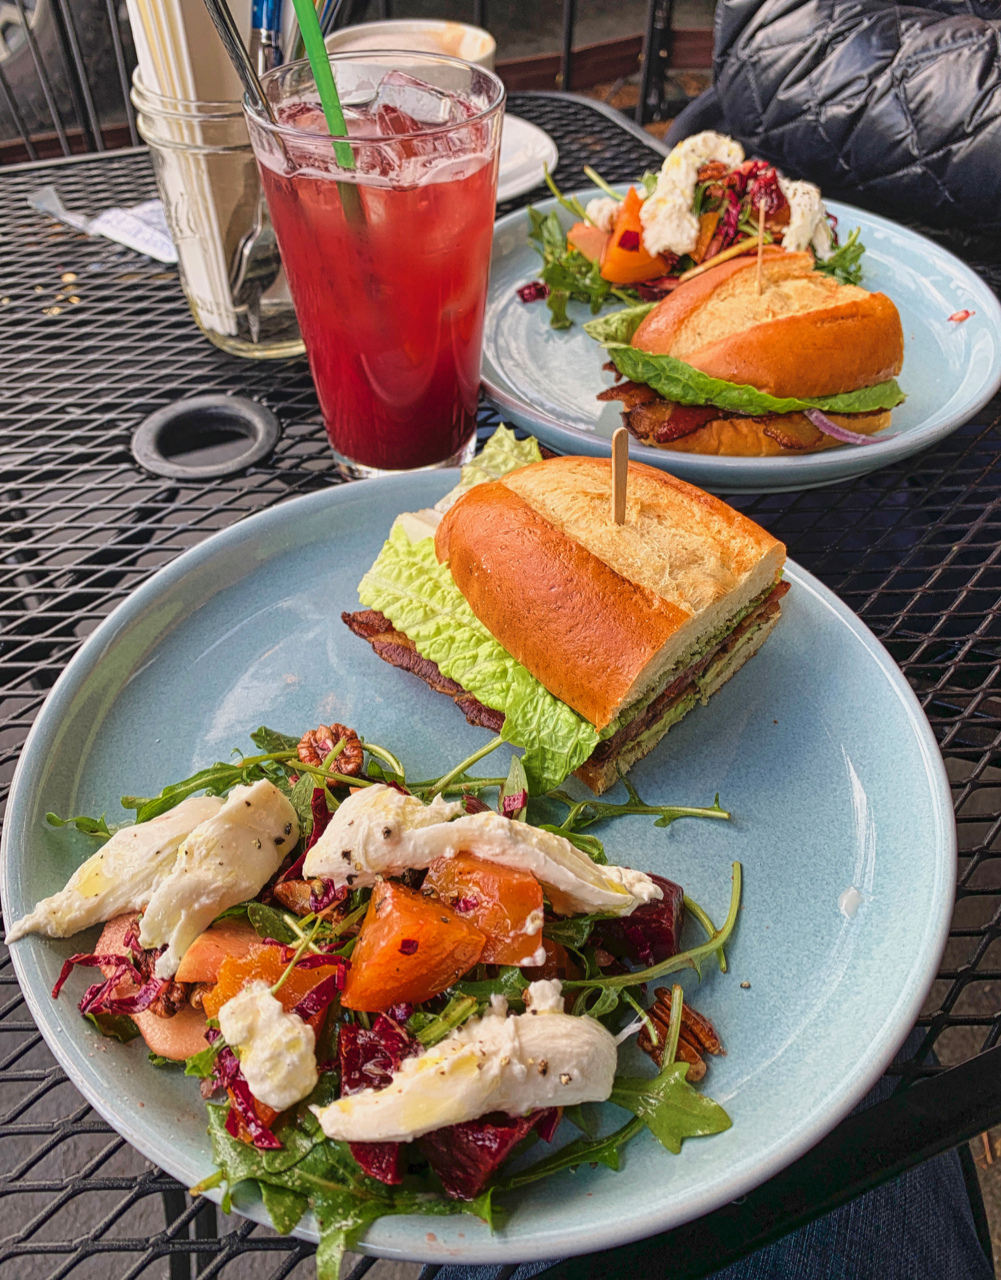 The beet salad and BLOAT sandwich